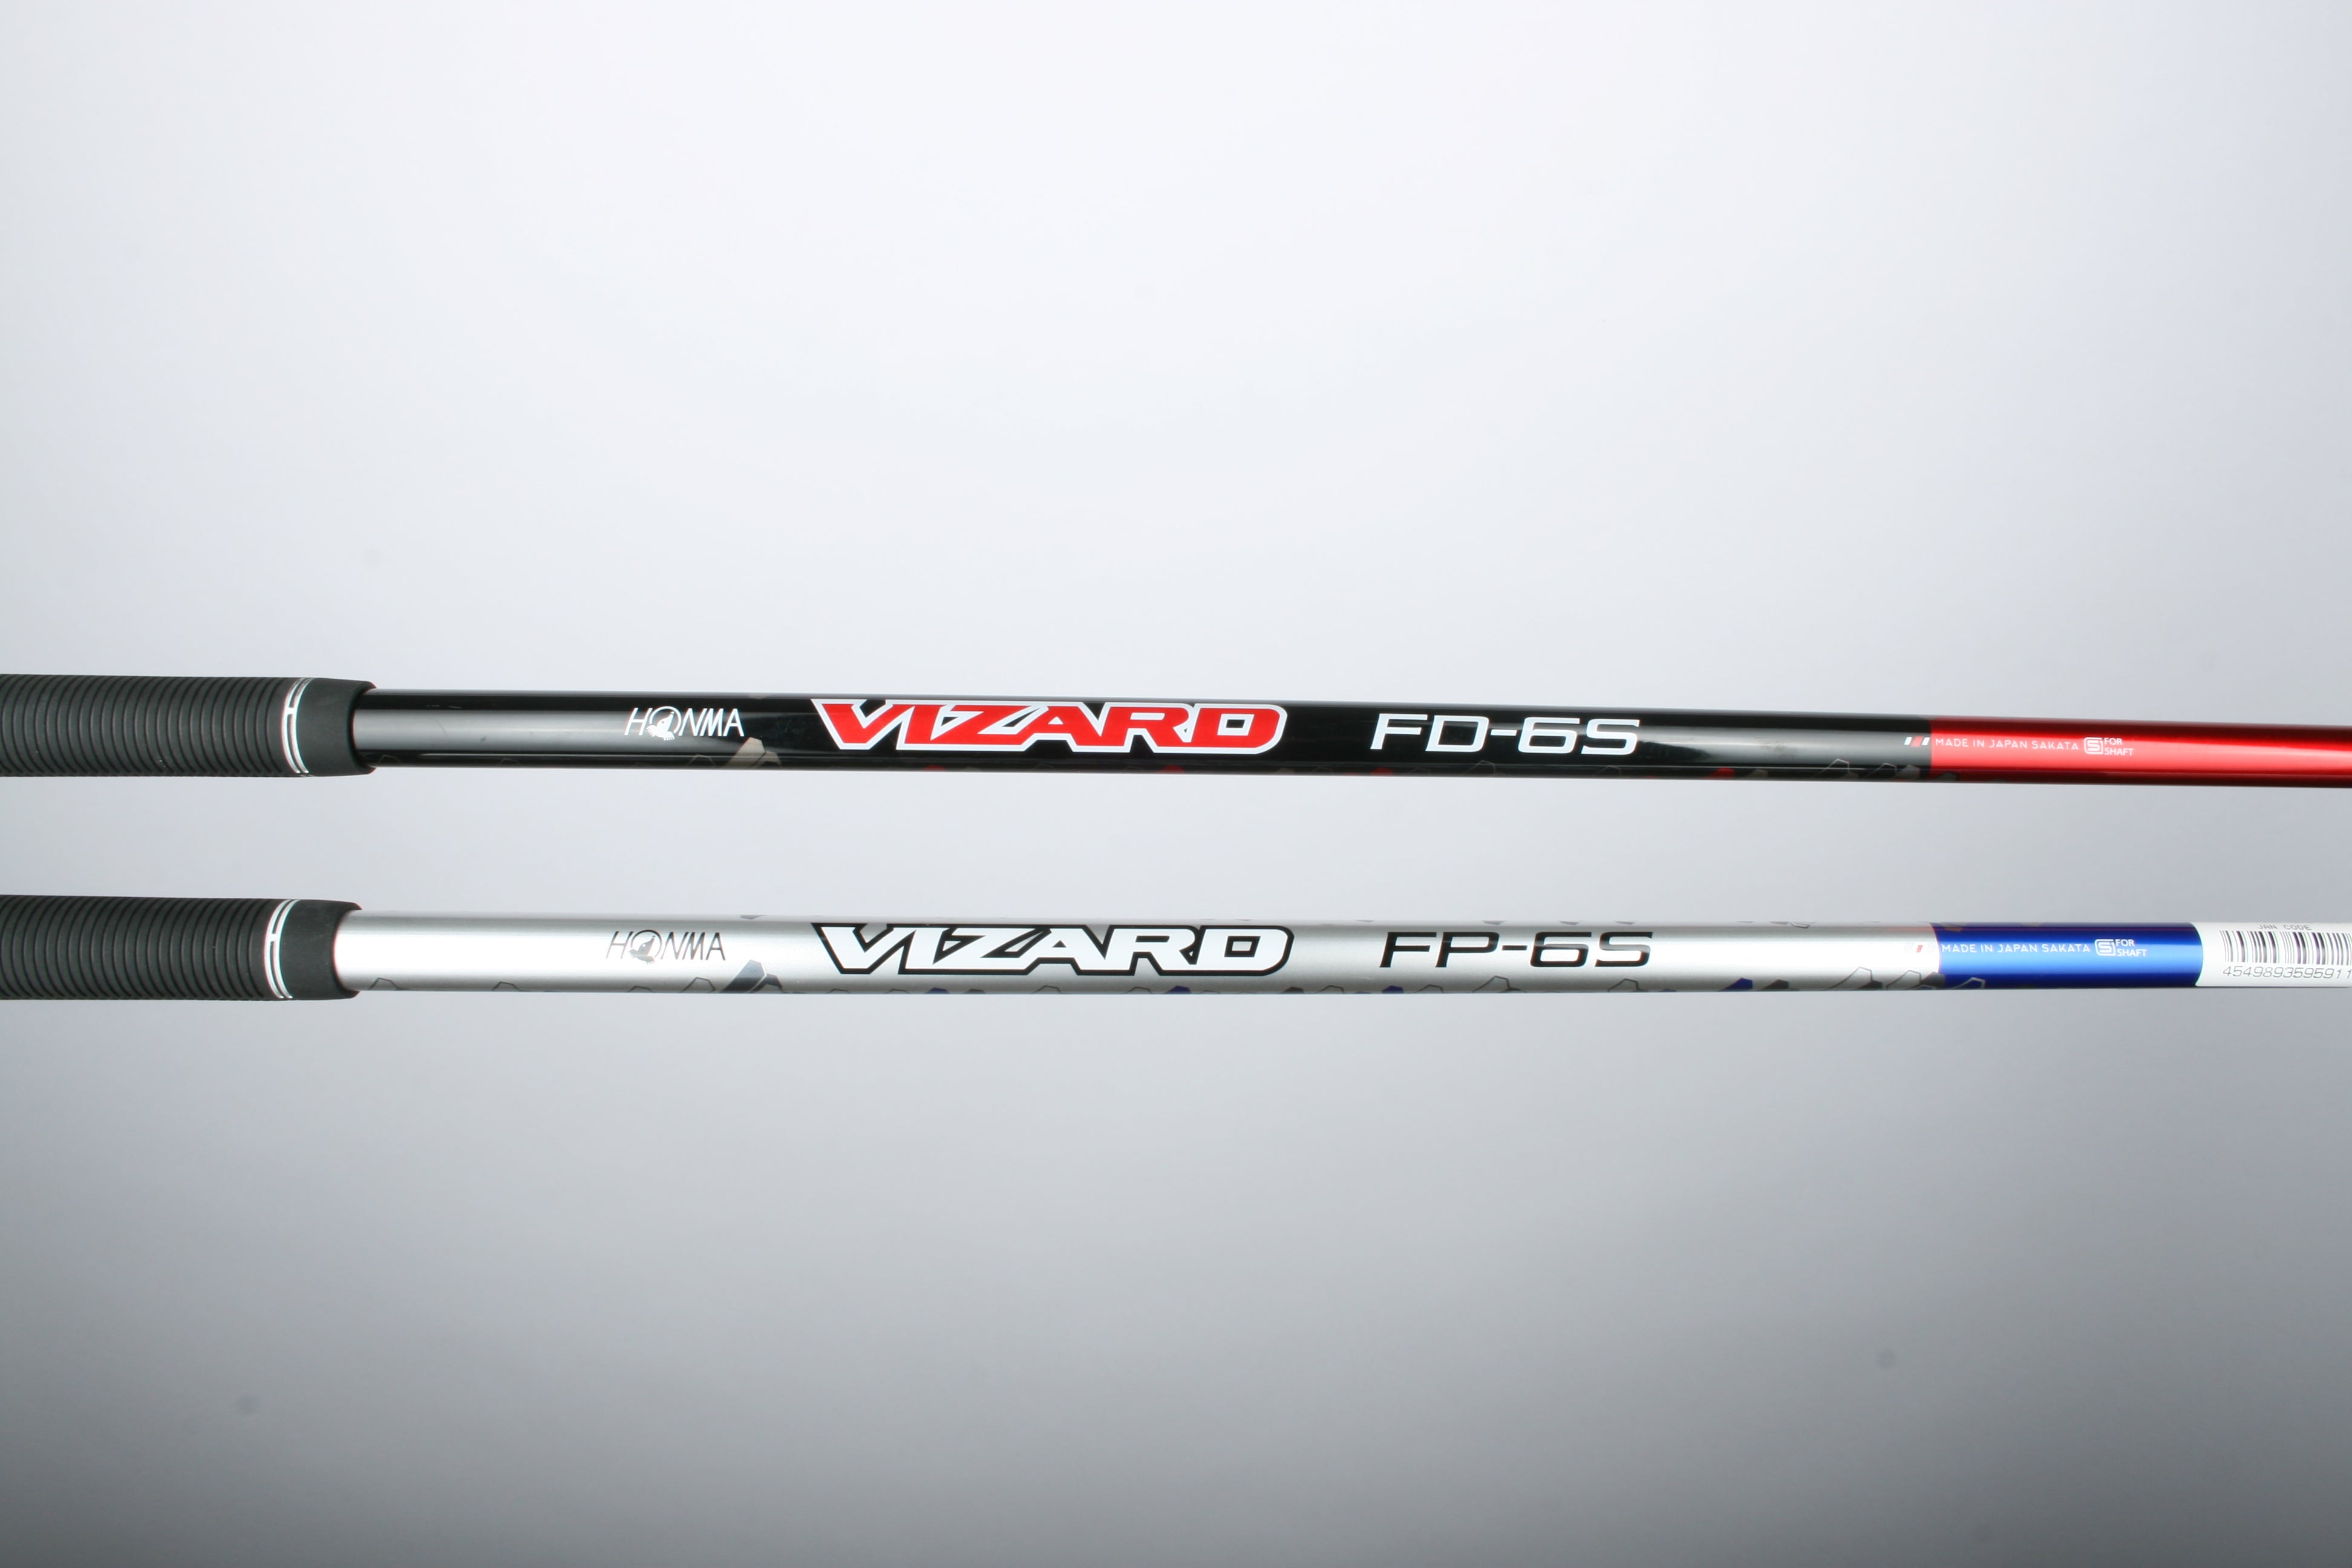 Honma TW747 Driver shafts reviewed and compared